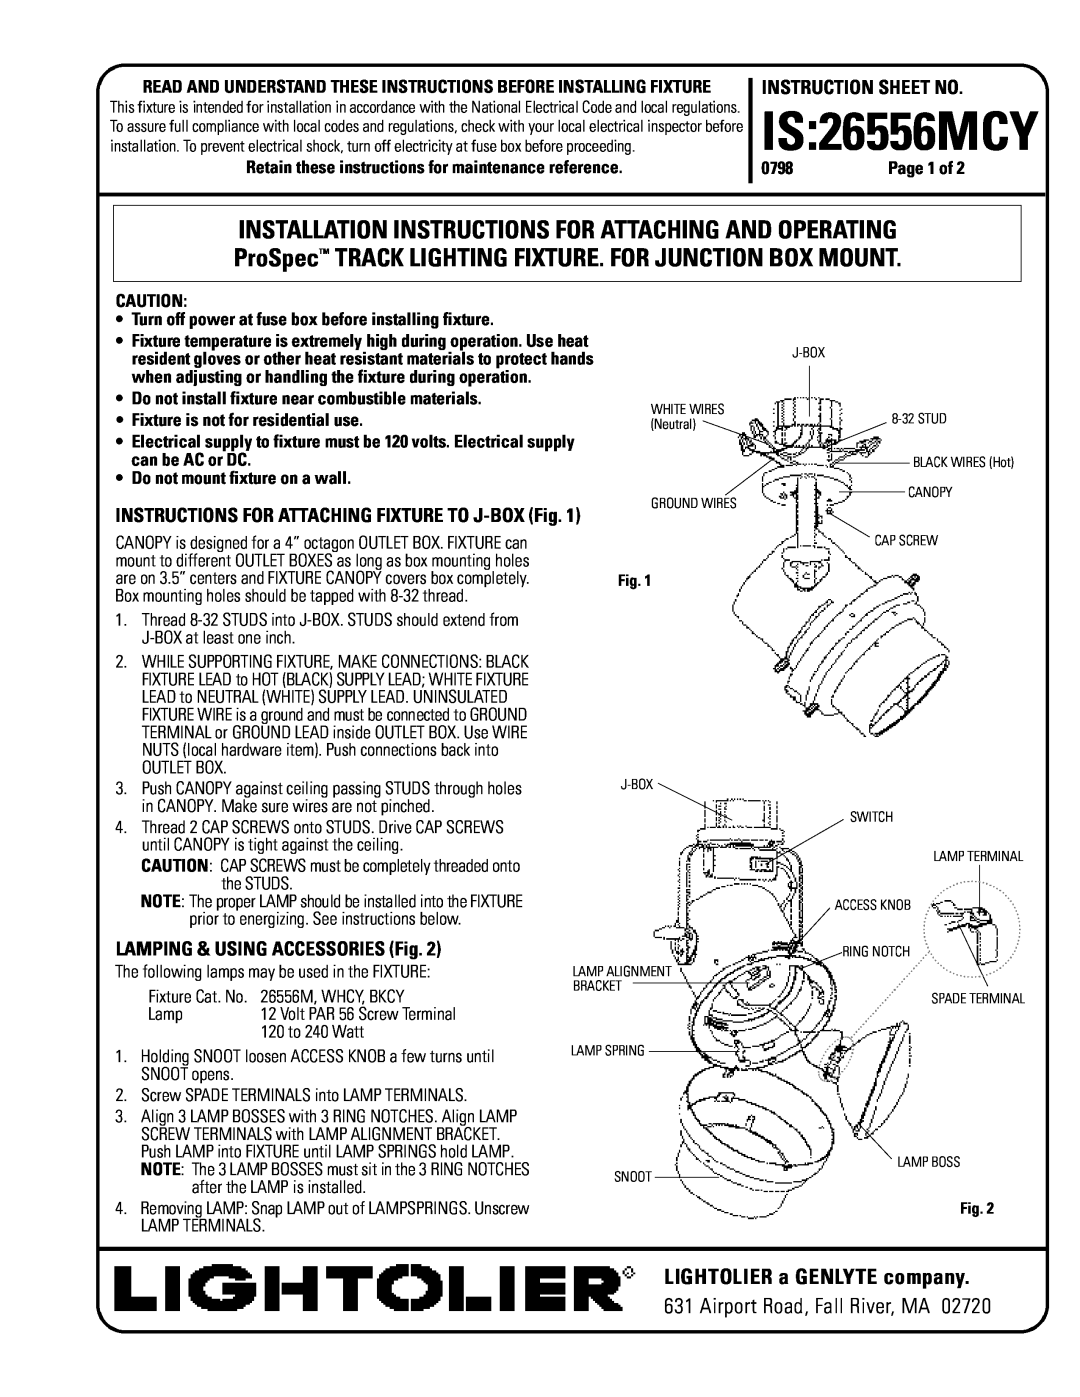 Lightolier IS_26556MCY instruction sheet LIGHTOLIER a GENLYTE company, Airport Road, Fall River, MA, Instruction Sheet No 